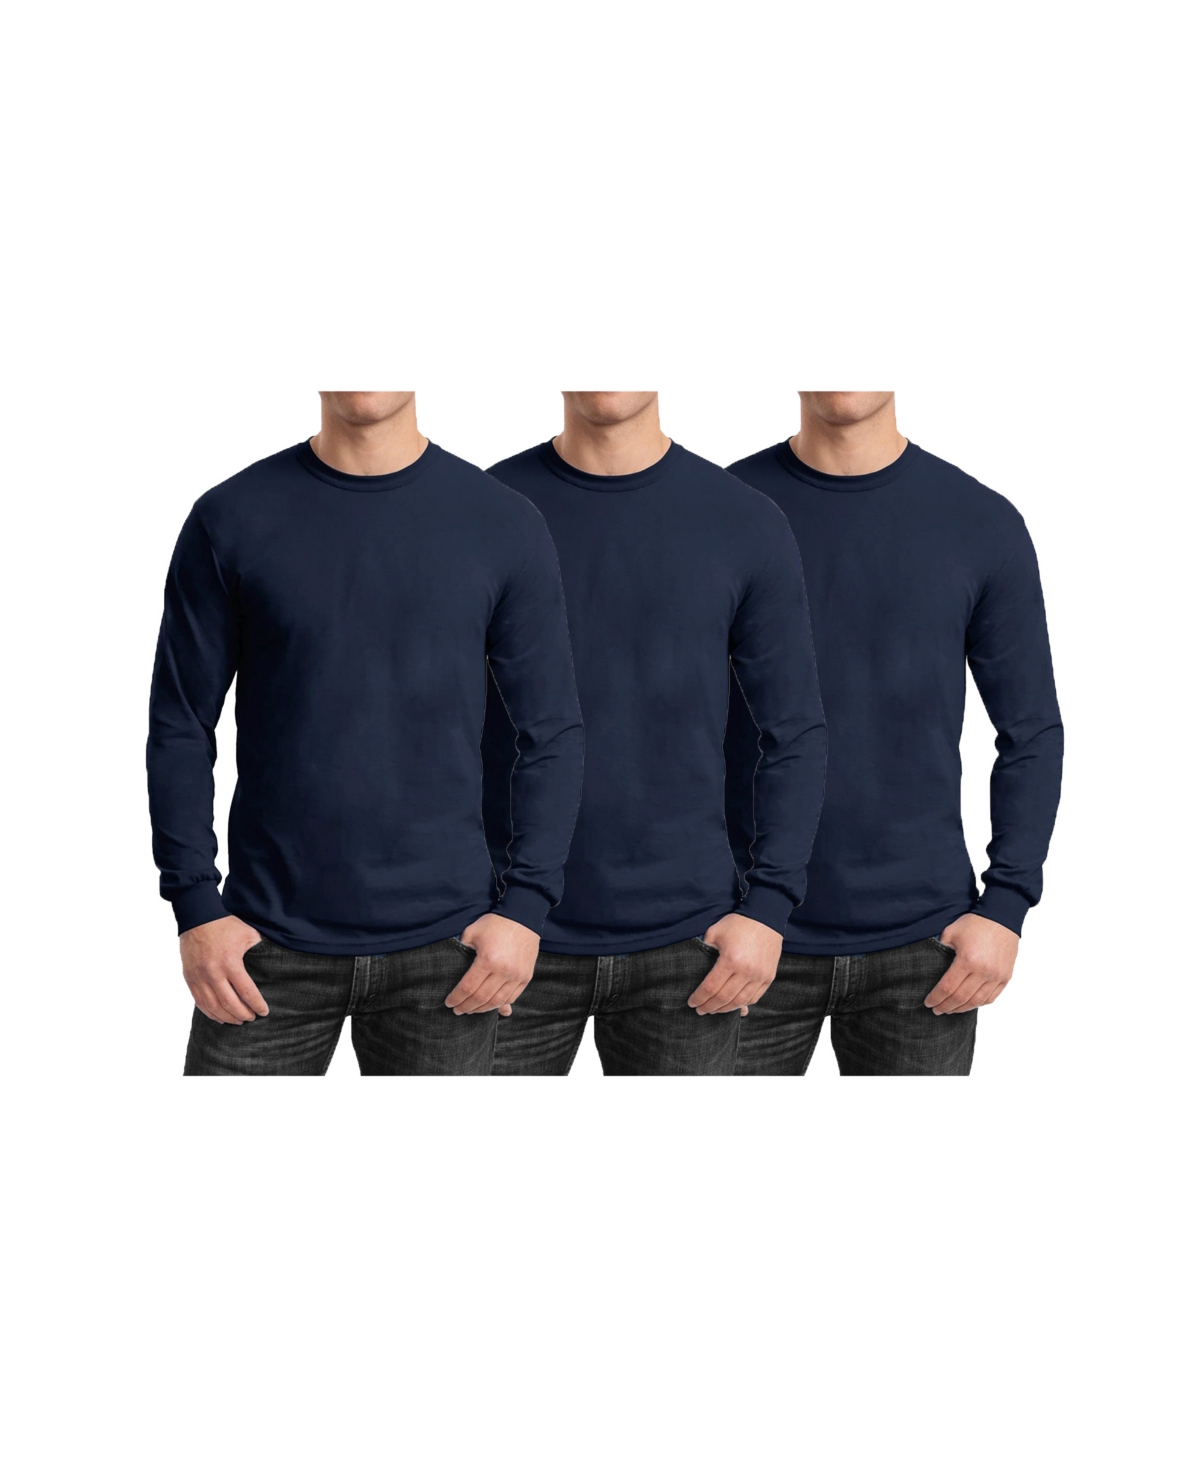 Galaxy By Harvic Men's 3-Pack Egyptian Cotton-Blend Long Sleeve Crew Neck Tee